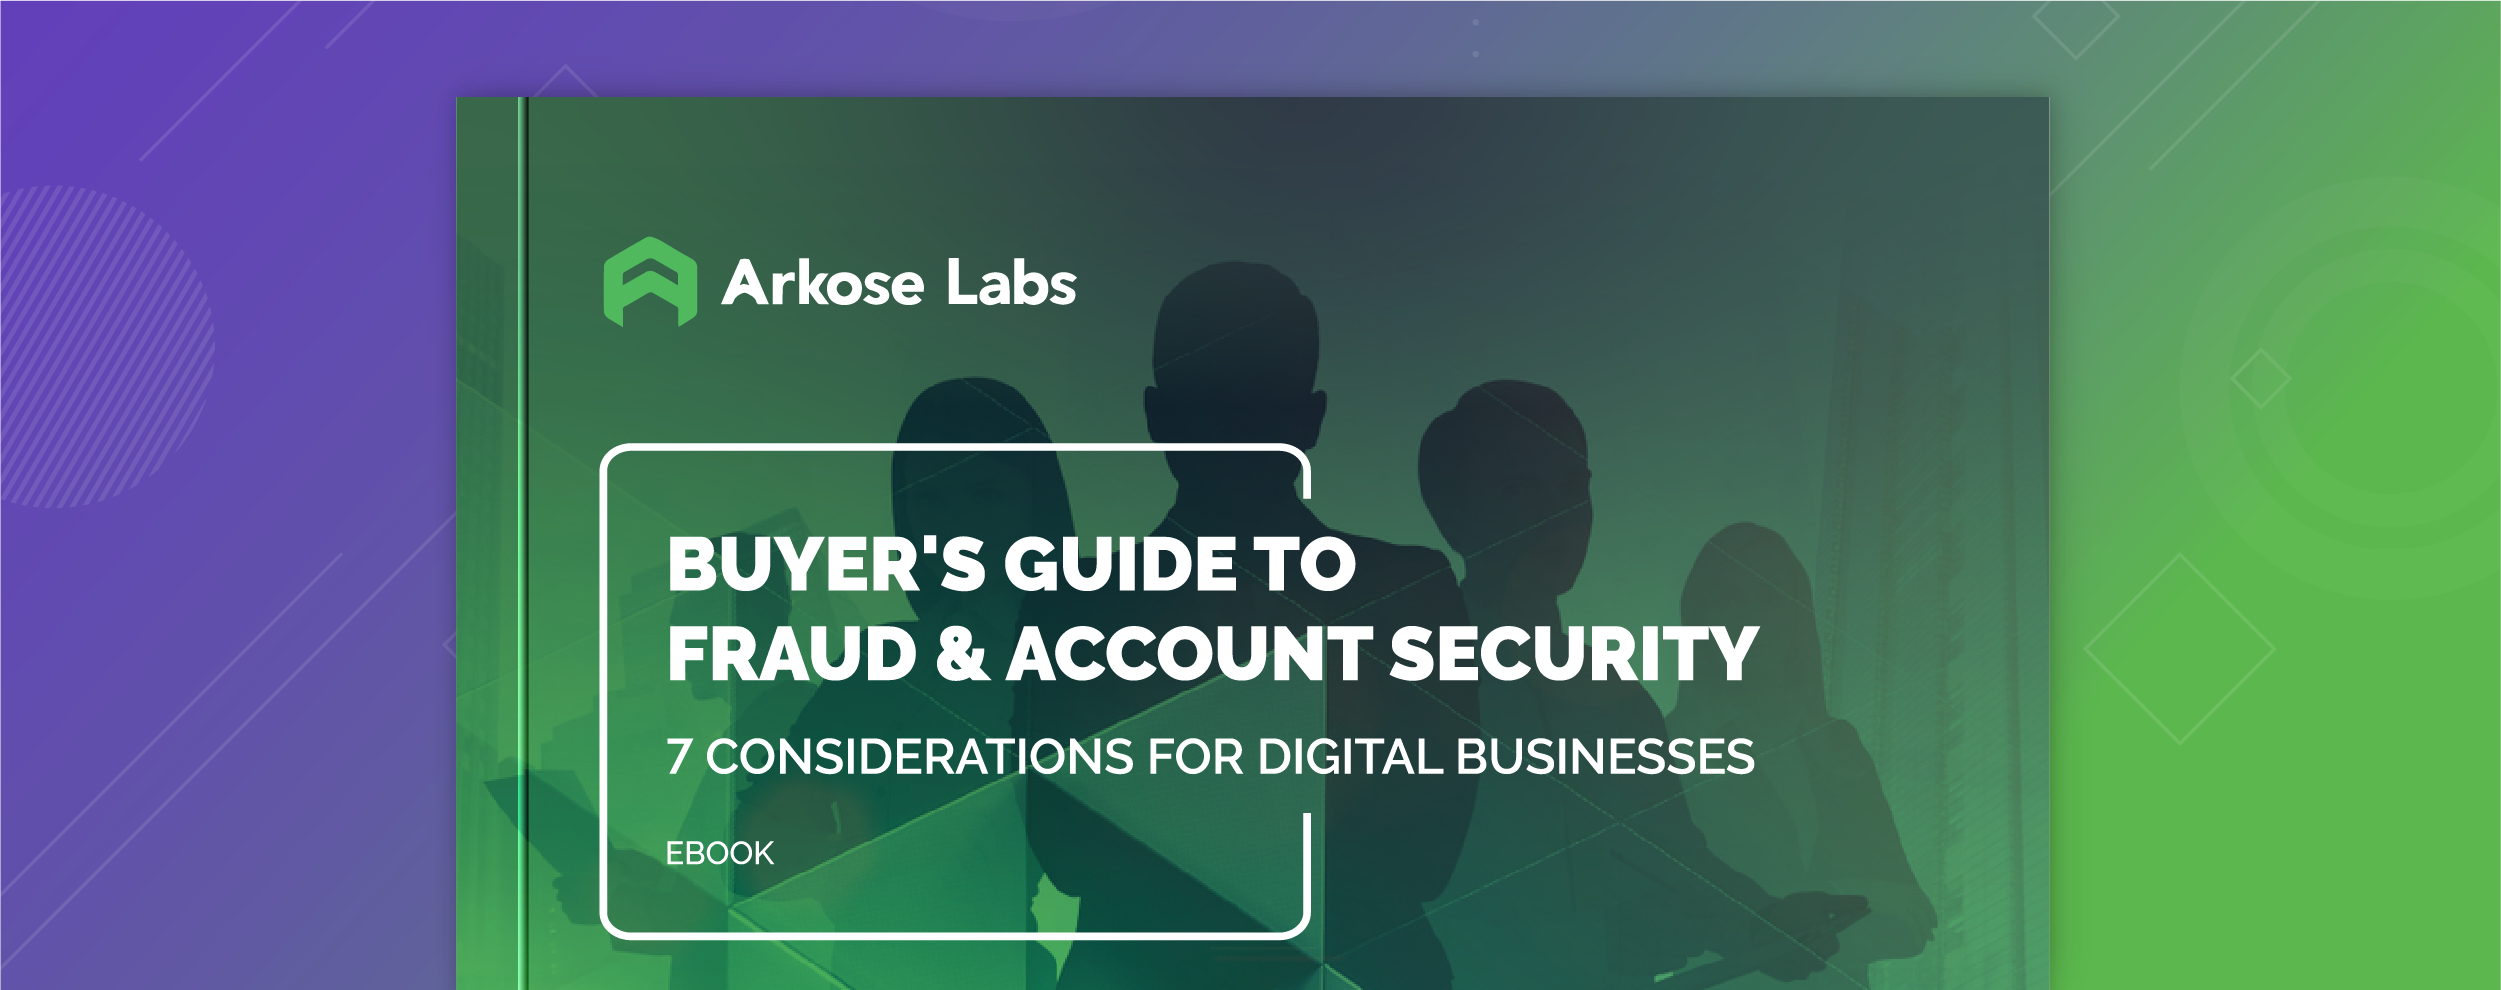 Buyer’s Guide to Fraud & Account Security